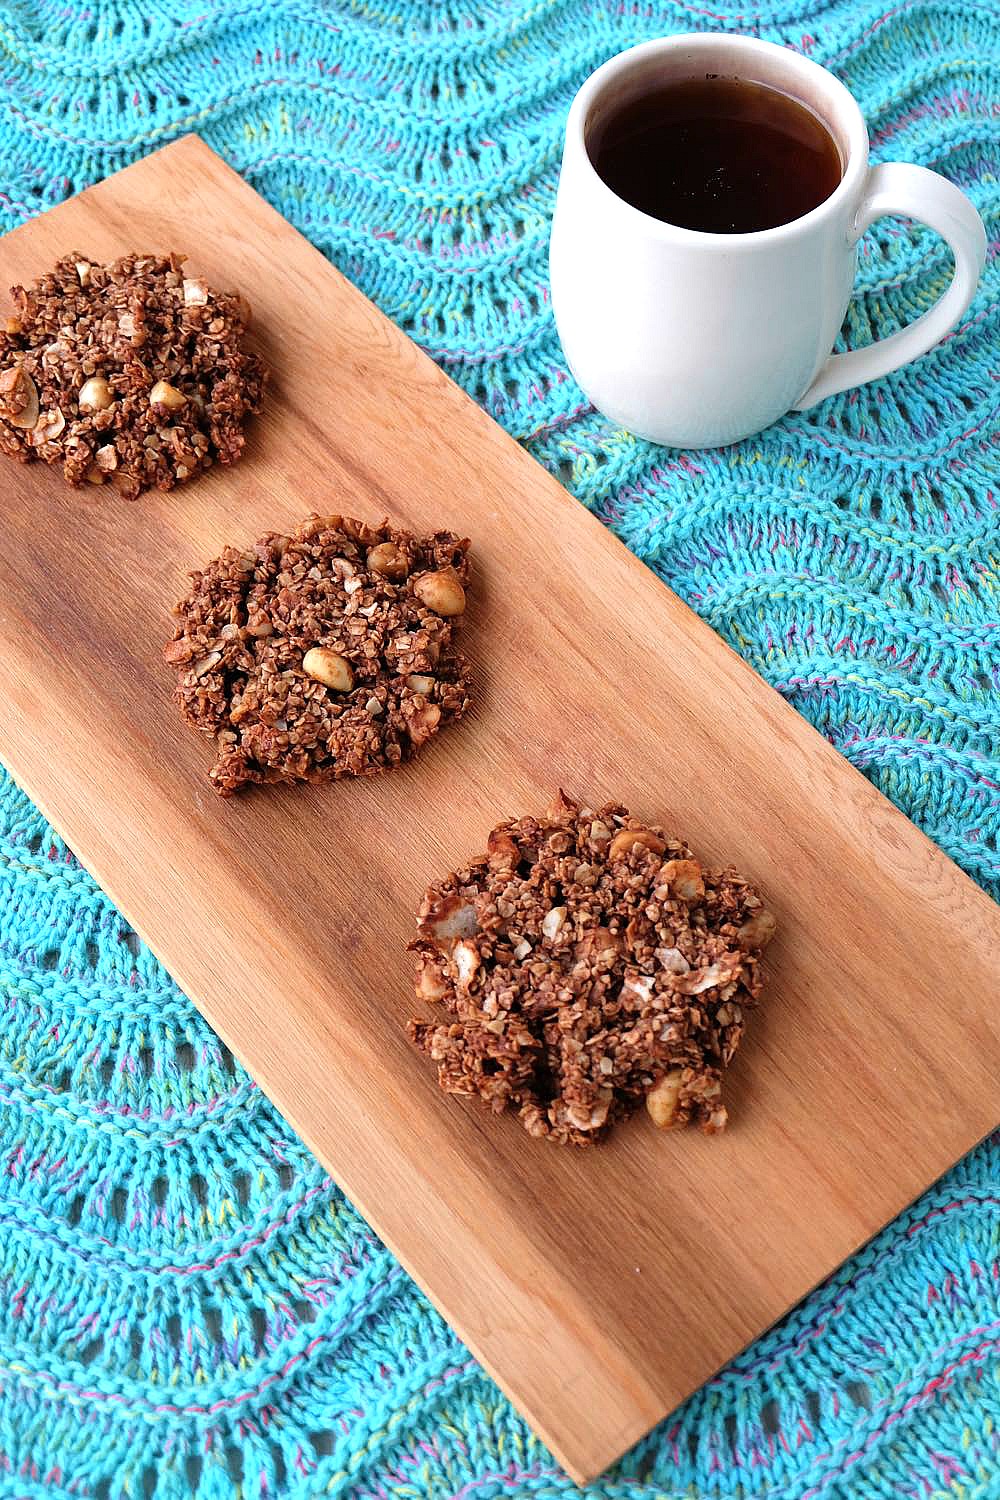 Looking for a delicious, easy and healthy breakfast idea? This chocolate coconut macadamia nut healthy breakfast cookie recipe is a delicious and guilt free way to start the day! Perfect for breakfast on the go, its gluten free, low in sugar, dairy free and packed with superfoods like raw cacao and flax seeds! Freeze extras for breakfast meal planning!